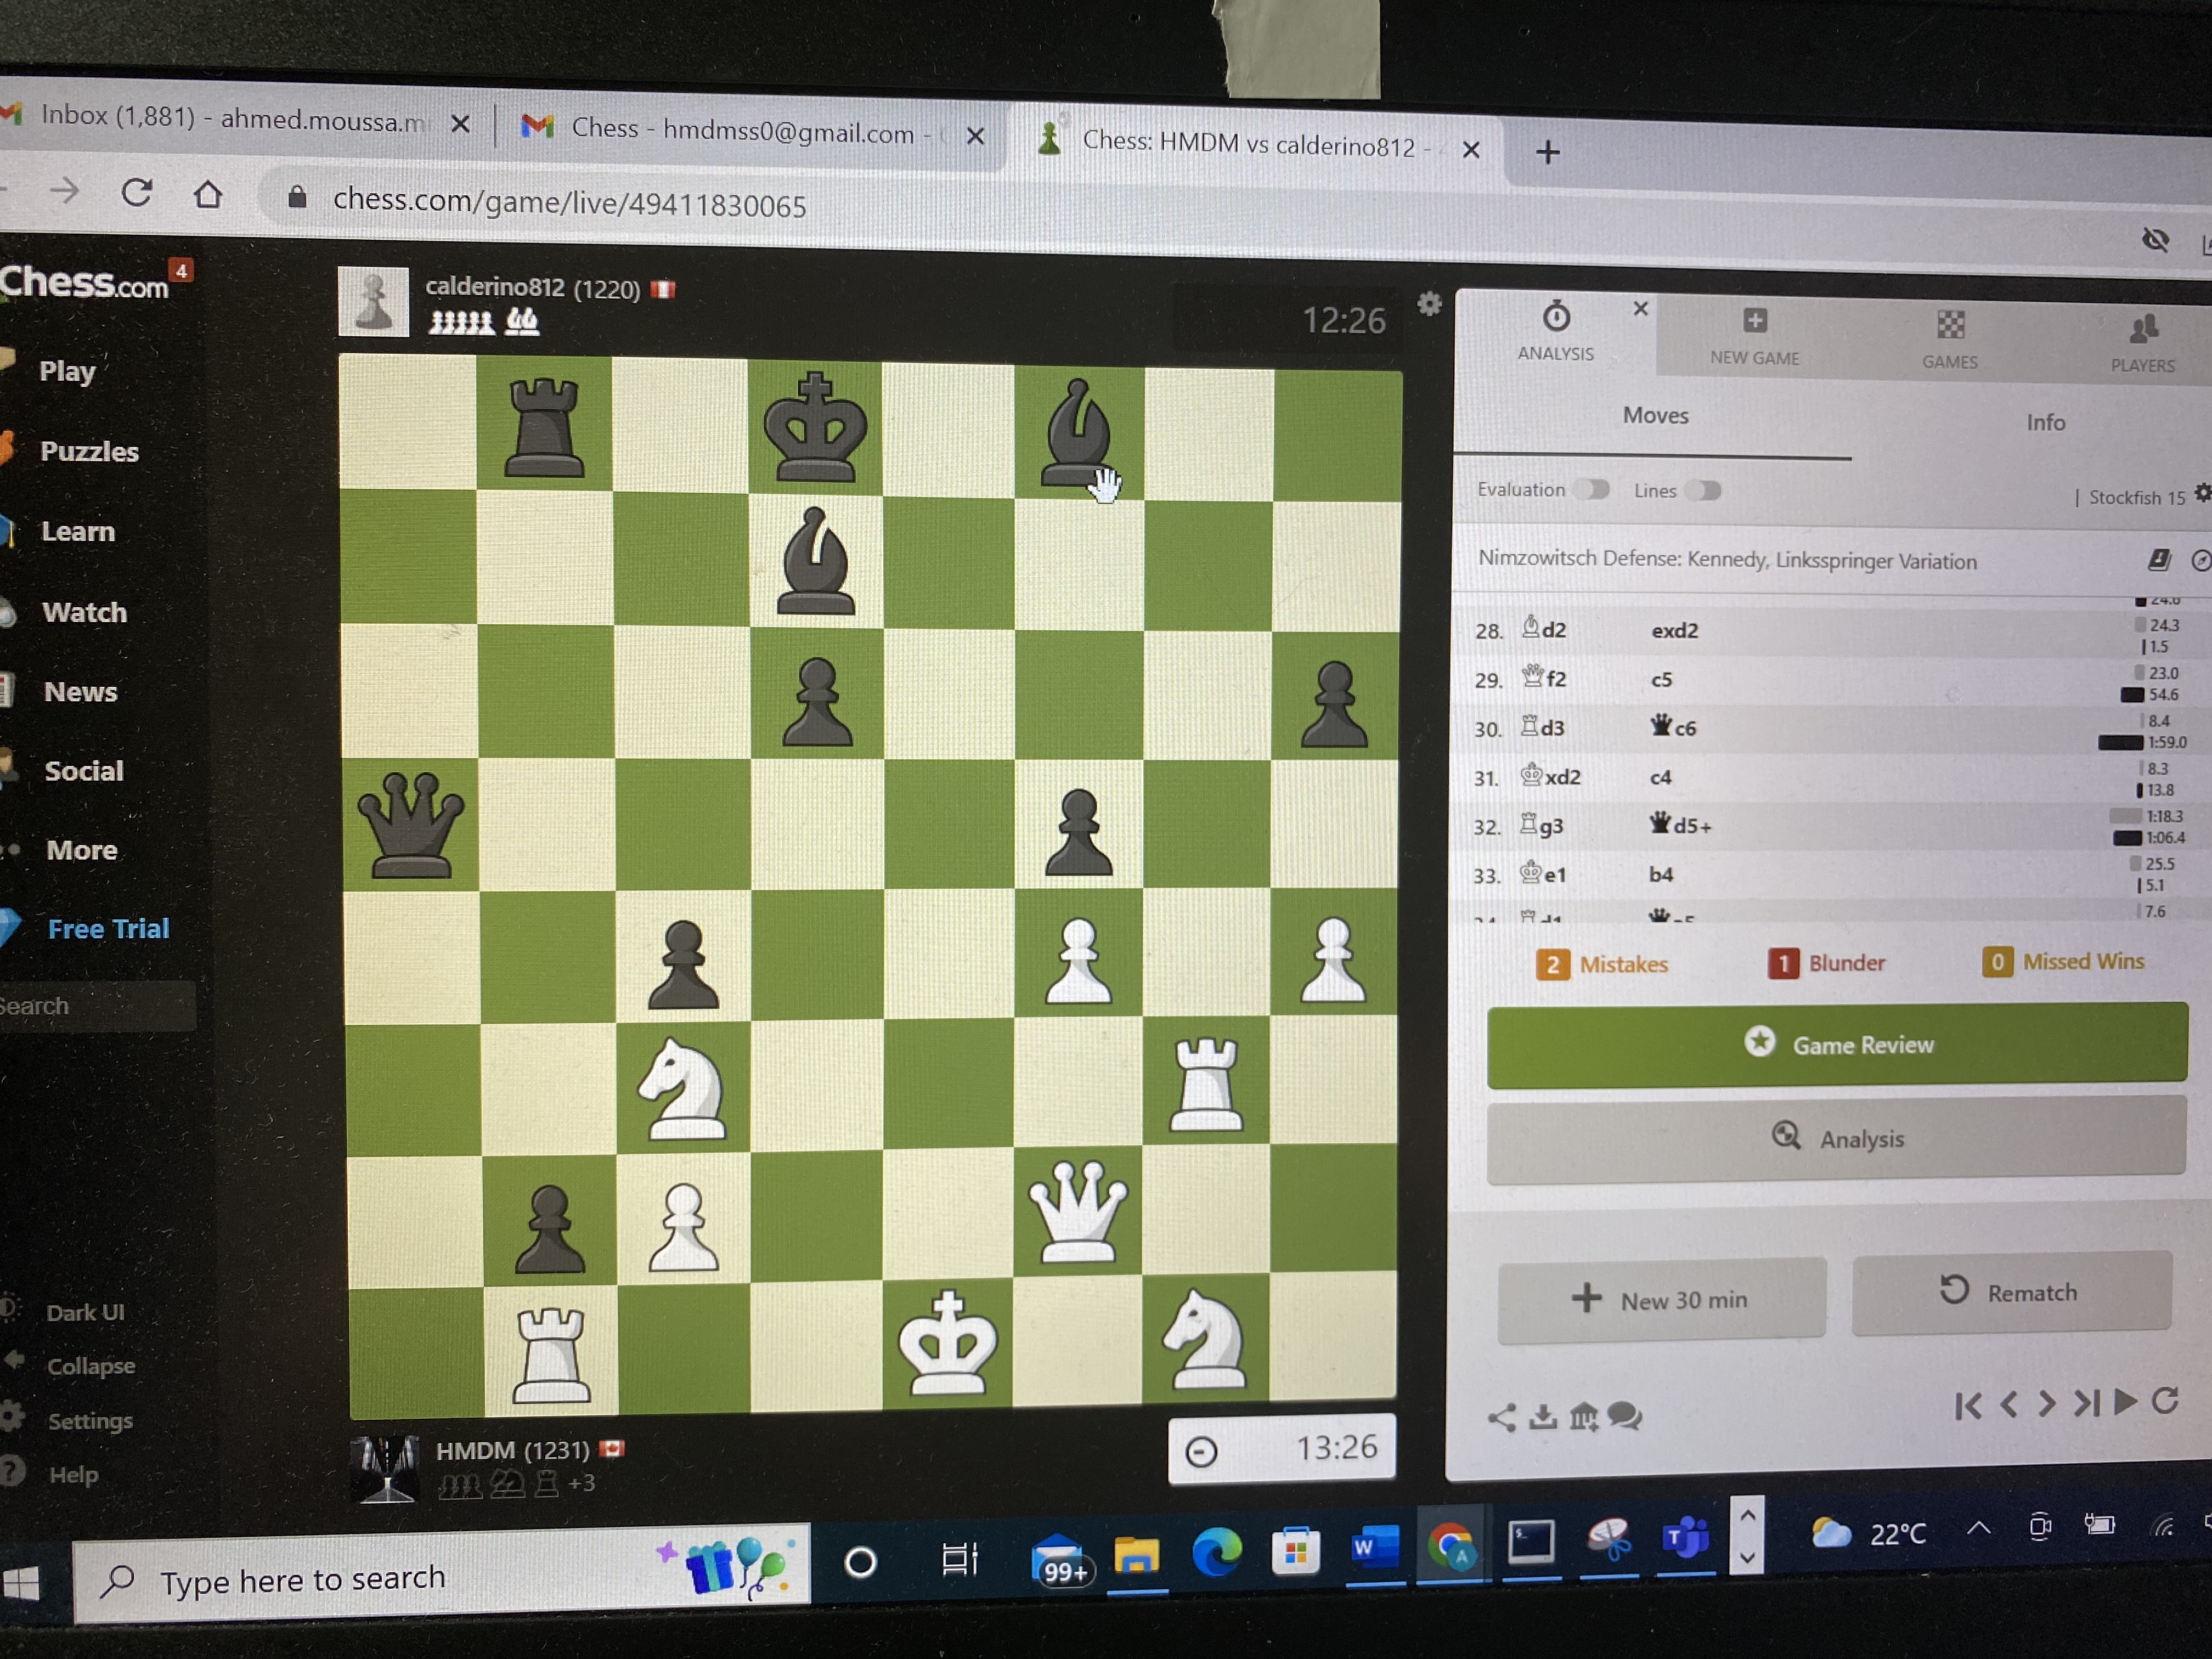 I made a browser extension that Adds Videos to Lichess (Analysis, Study)  and Chess.com (Analysis, Game Review) so you can watch matching   videos explaining the positions there. Link in the comments 